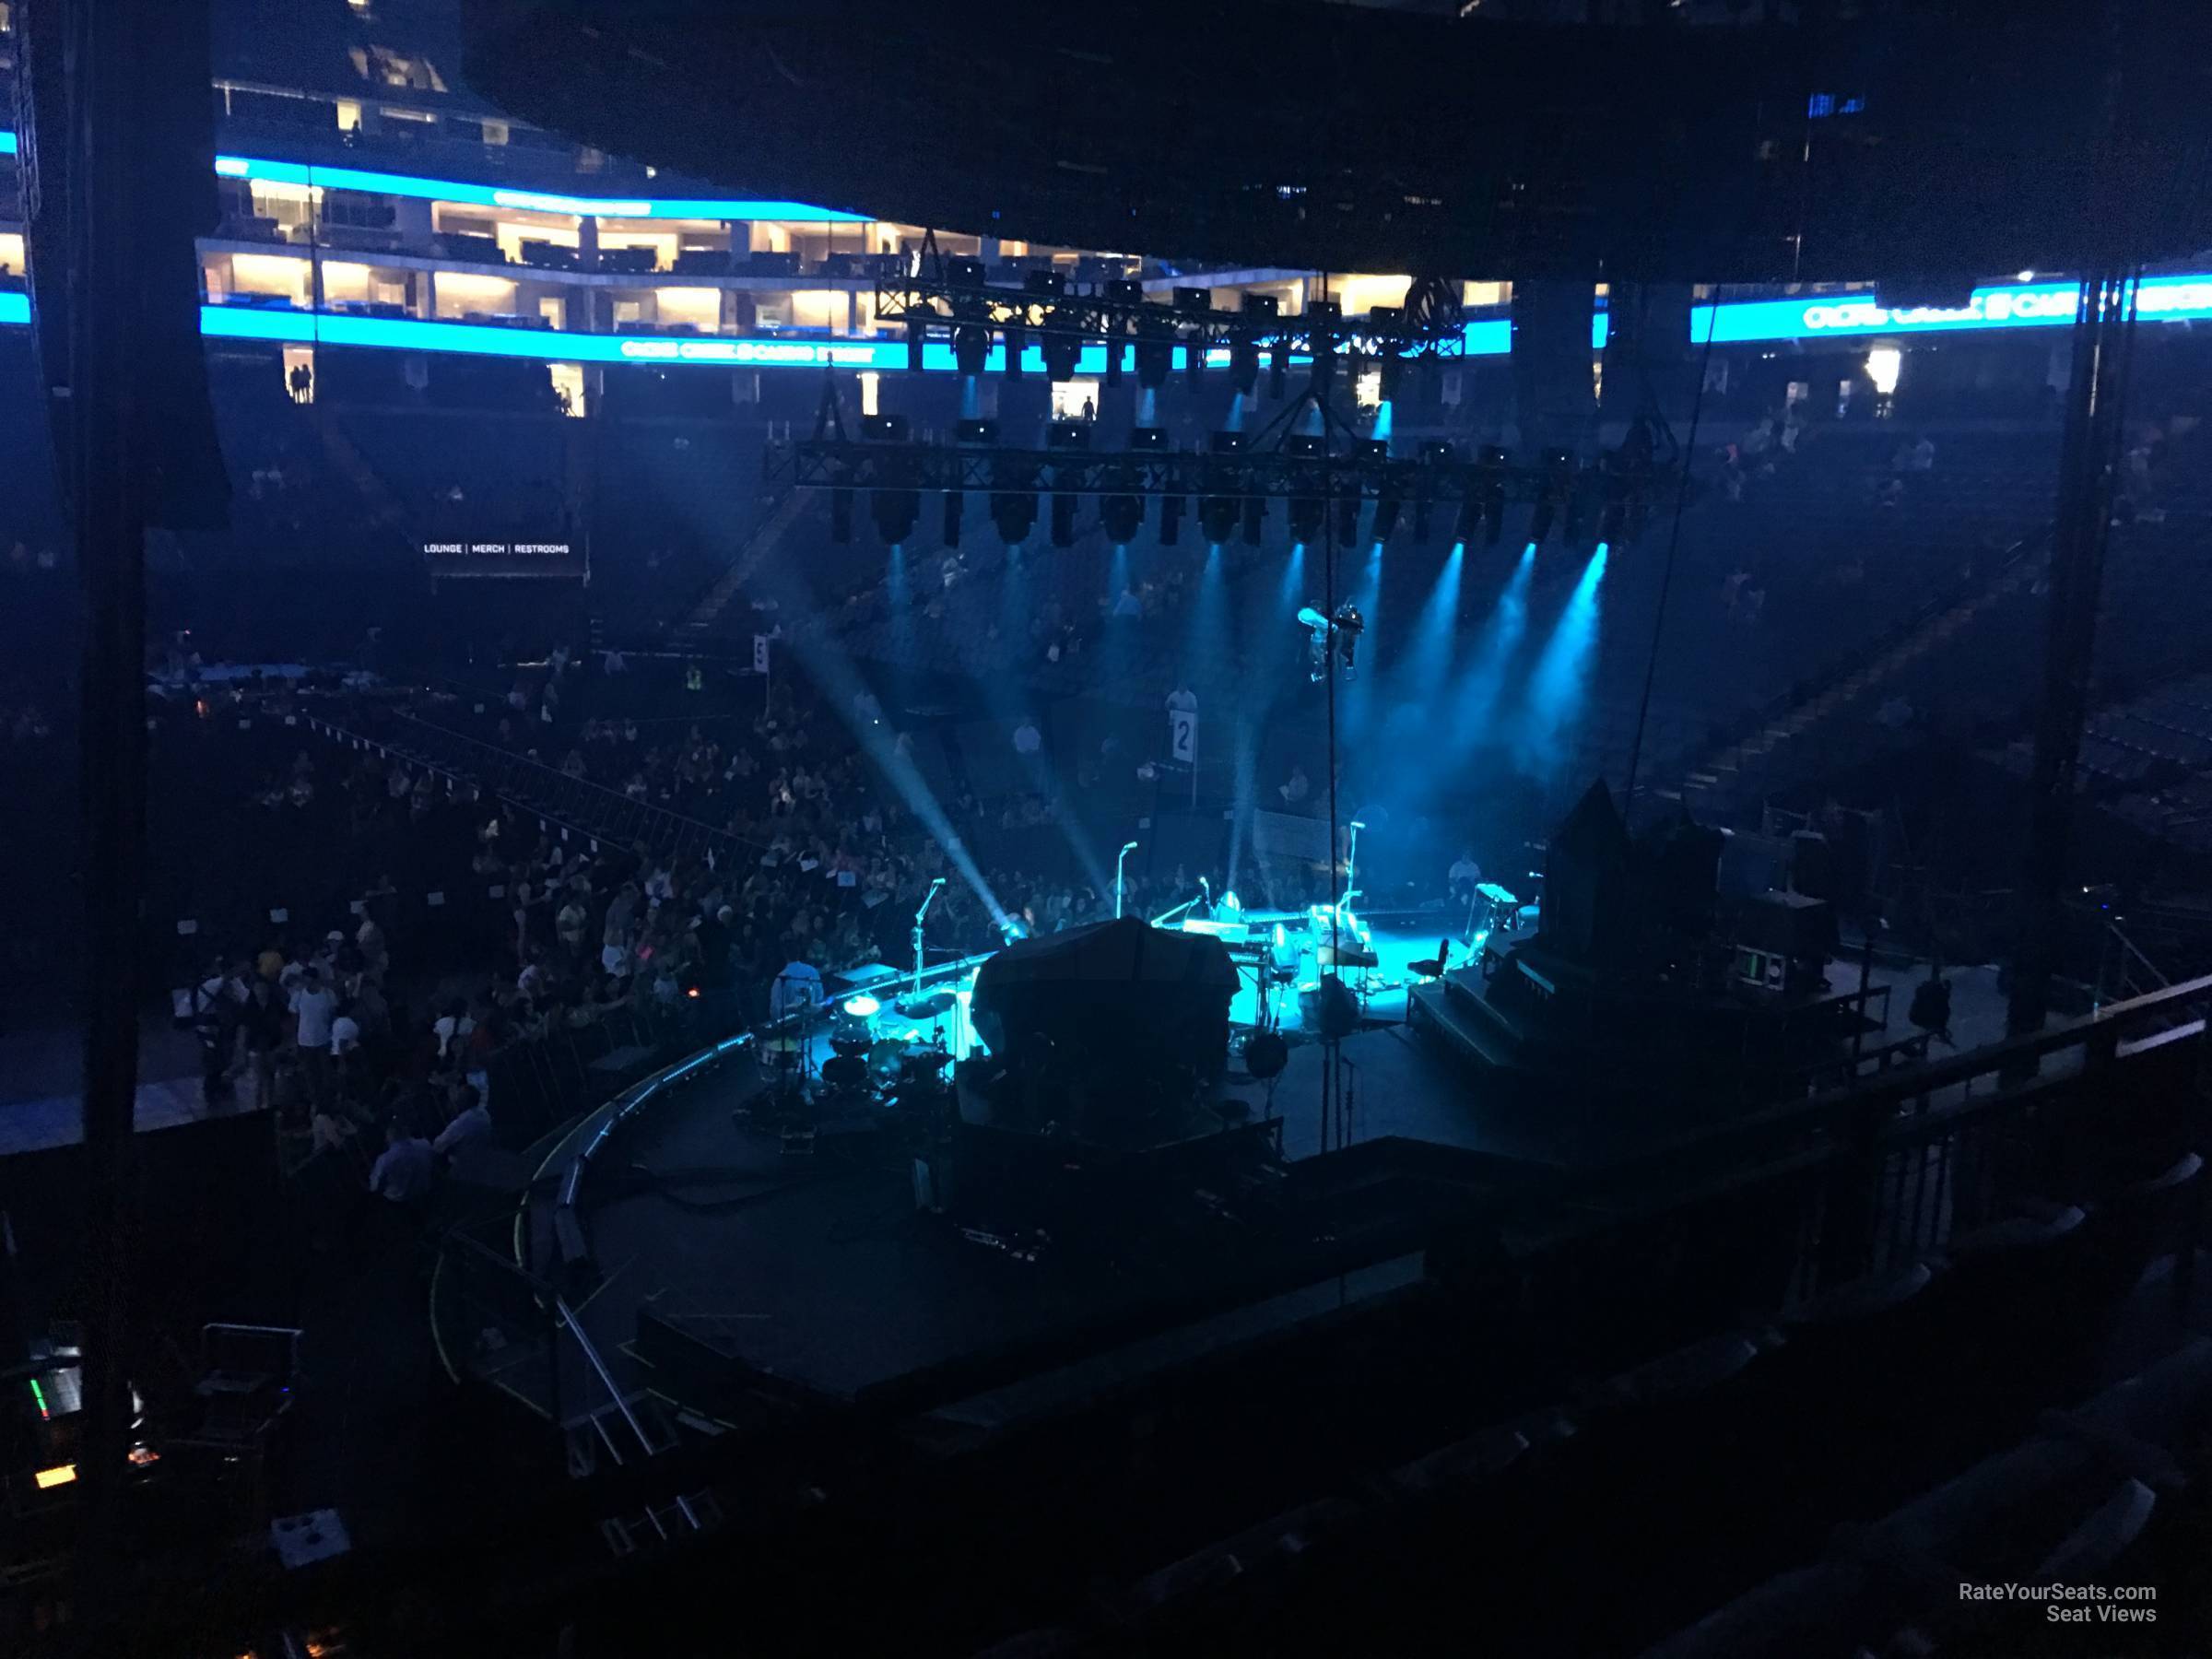 section 102, row a seat view  for concert - golden 1 center